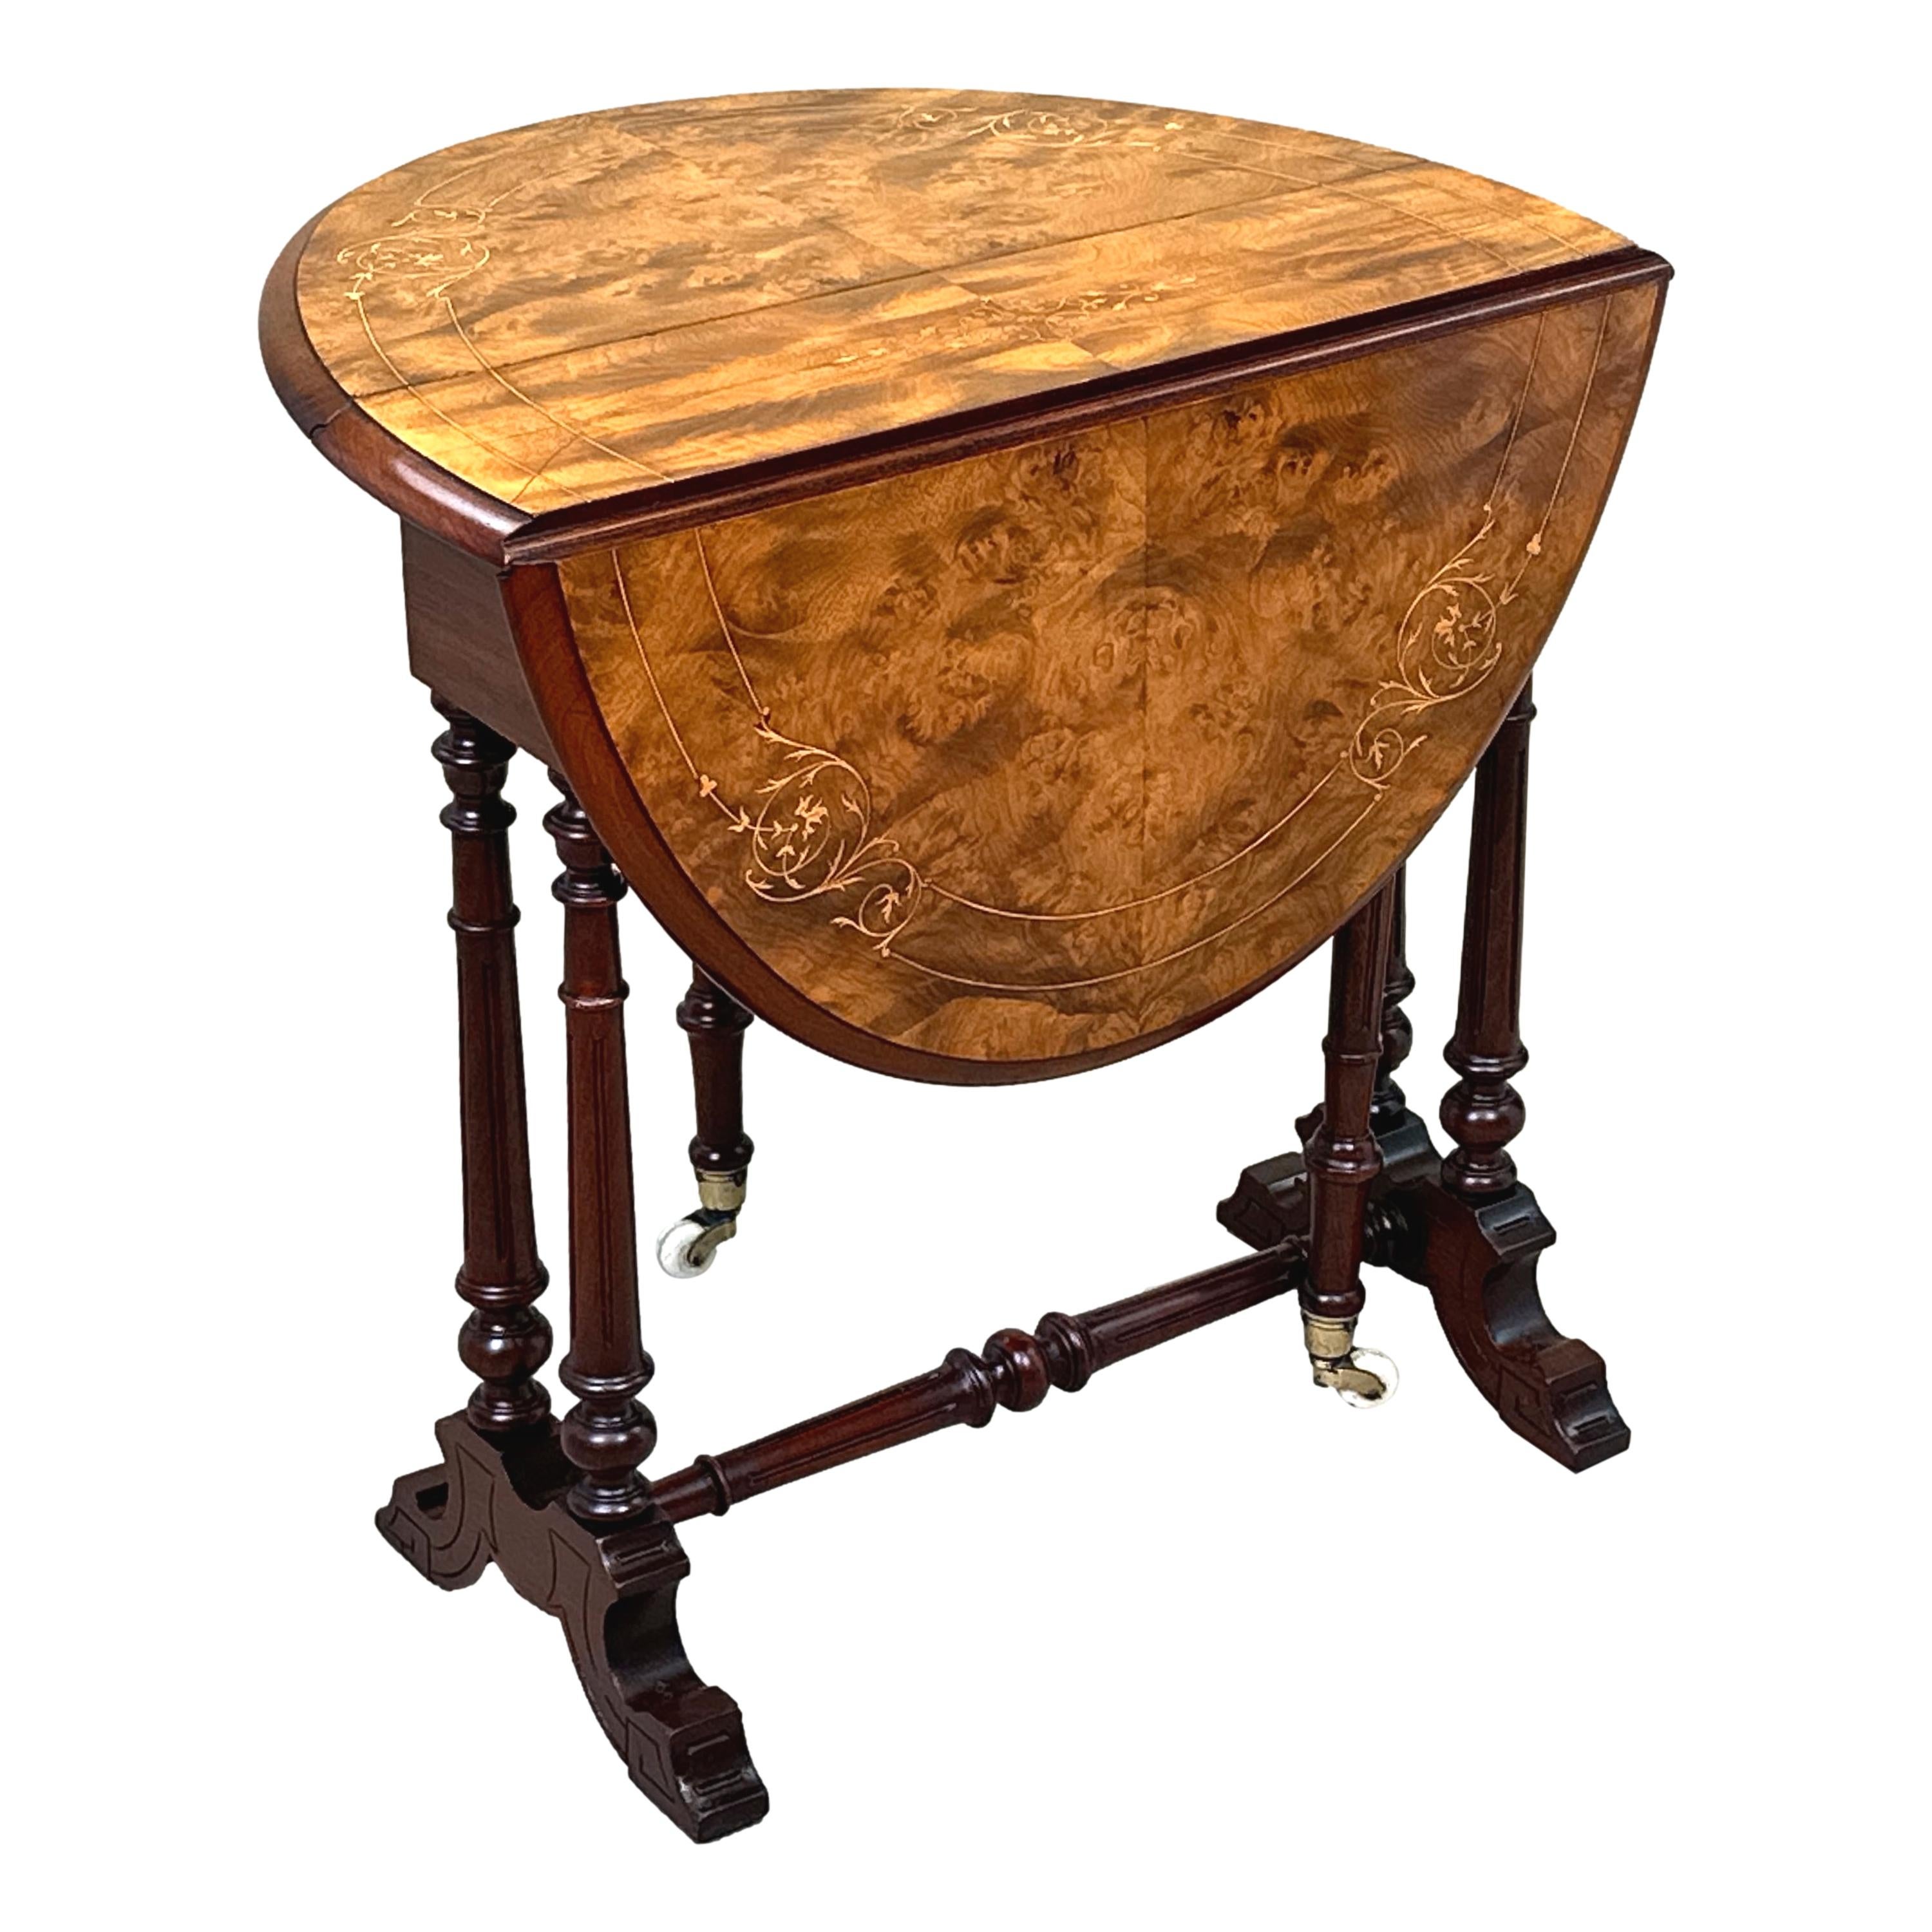 A Very Good Quality Late 19th Century, Victorian Period, Figured Walnut Baby Sutherland Table, Having Attractive Marquetry Inlaid Decoration To Well Figured Oval Drop Flap Top, Raised On Elegant Turned Eupright Supports With Original Ceramic